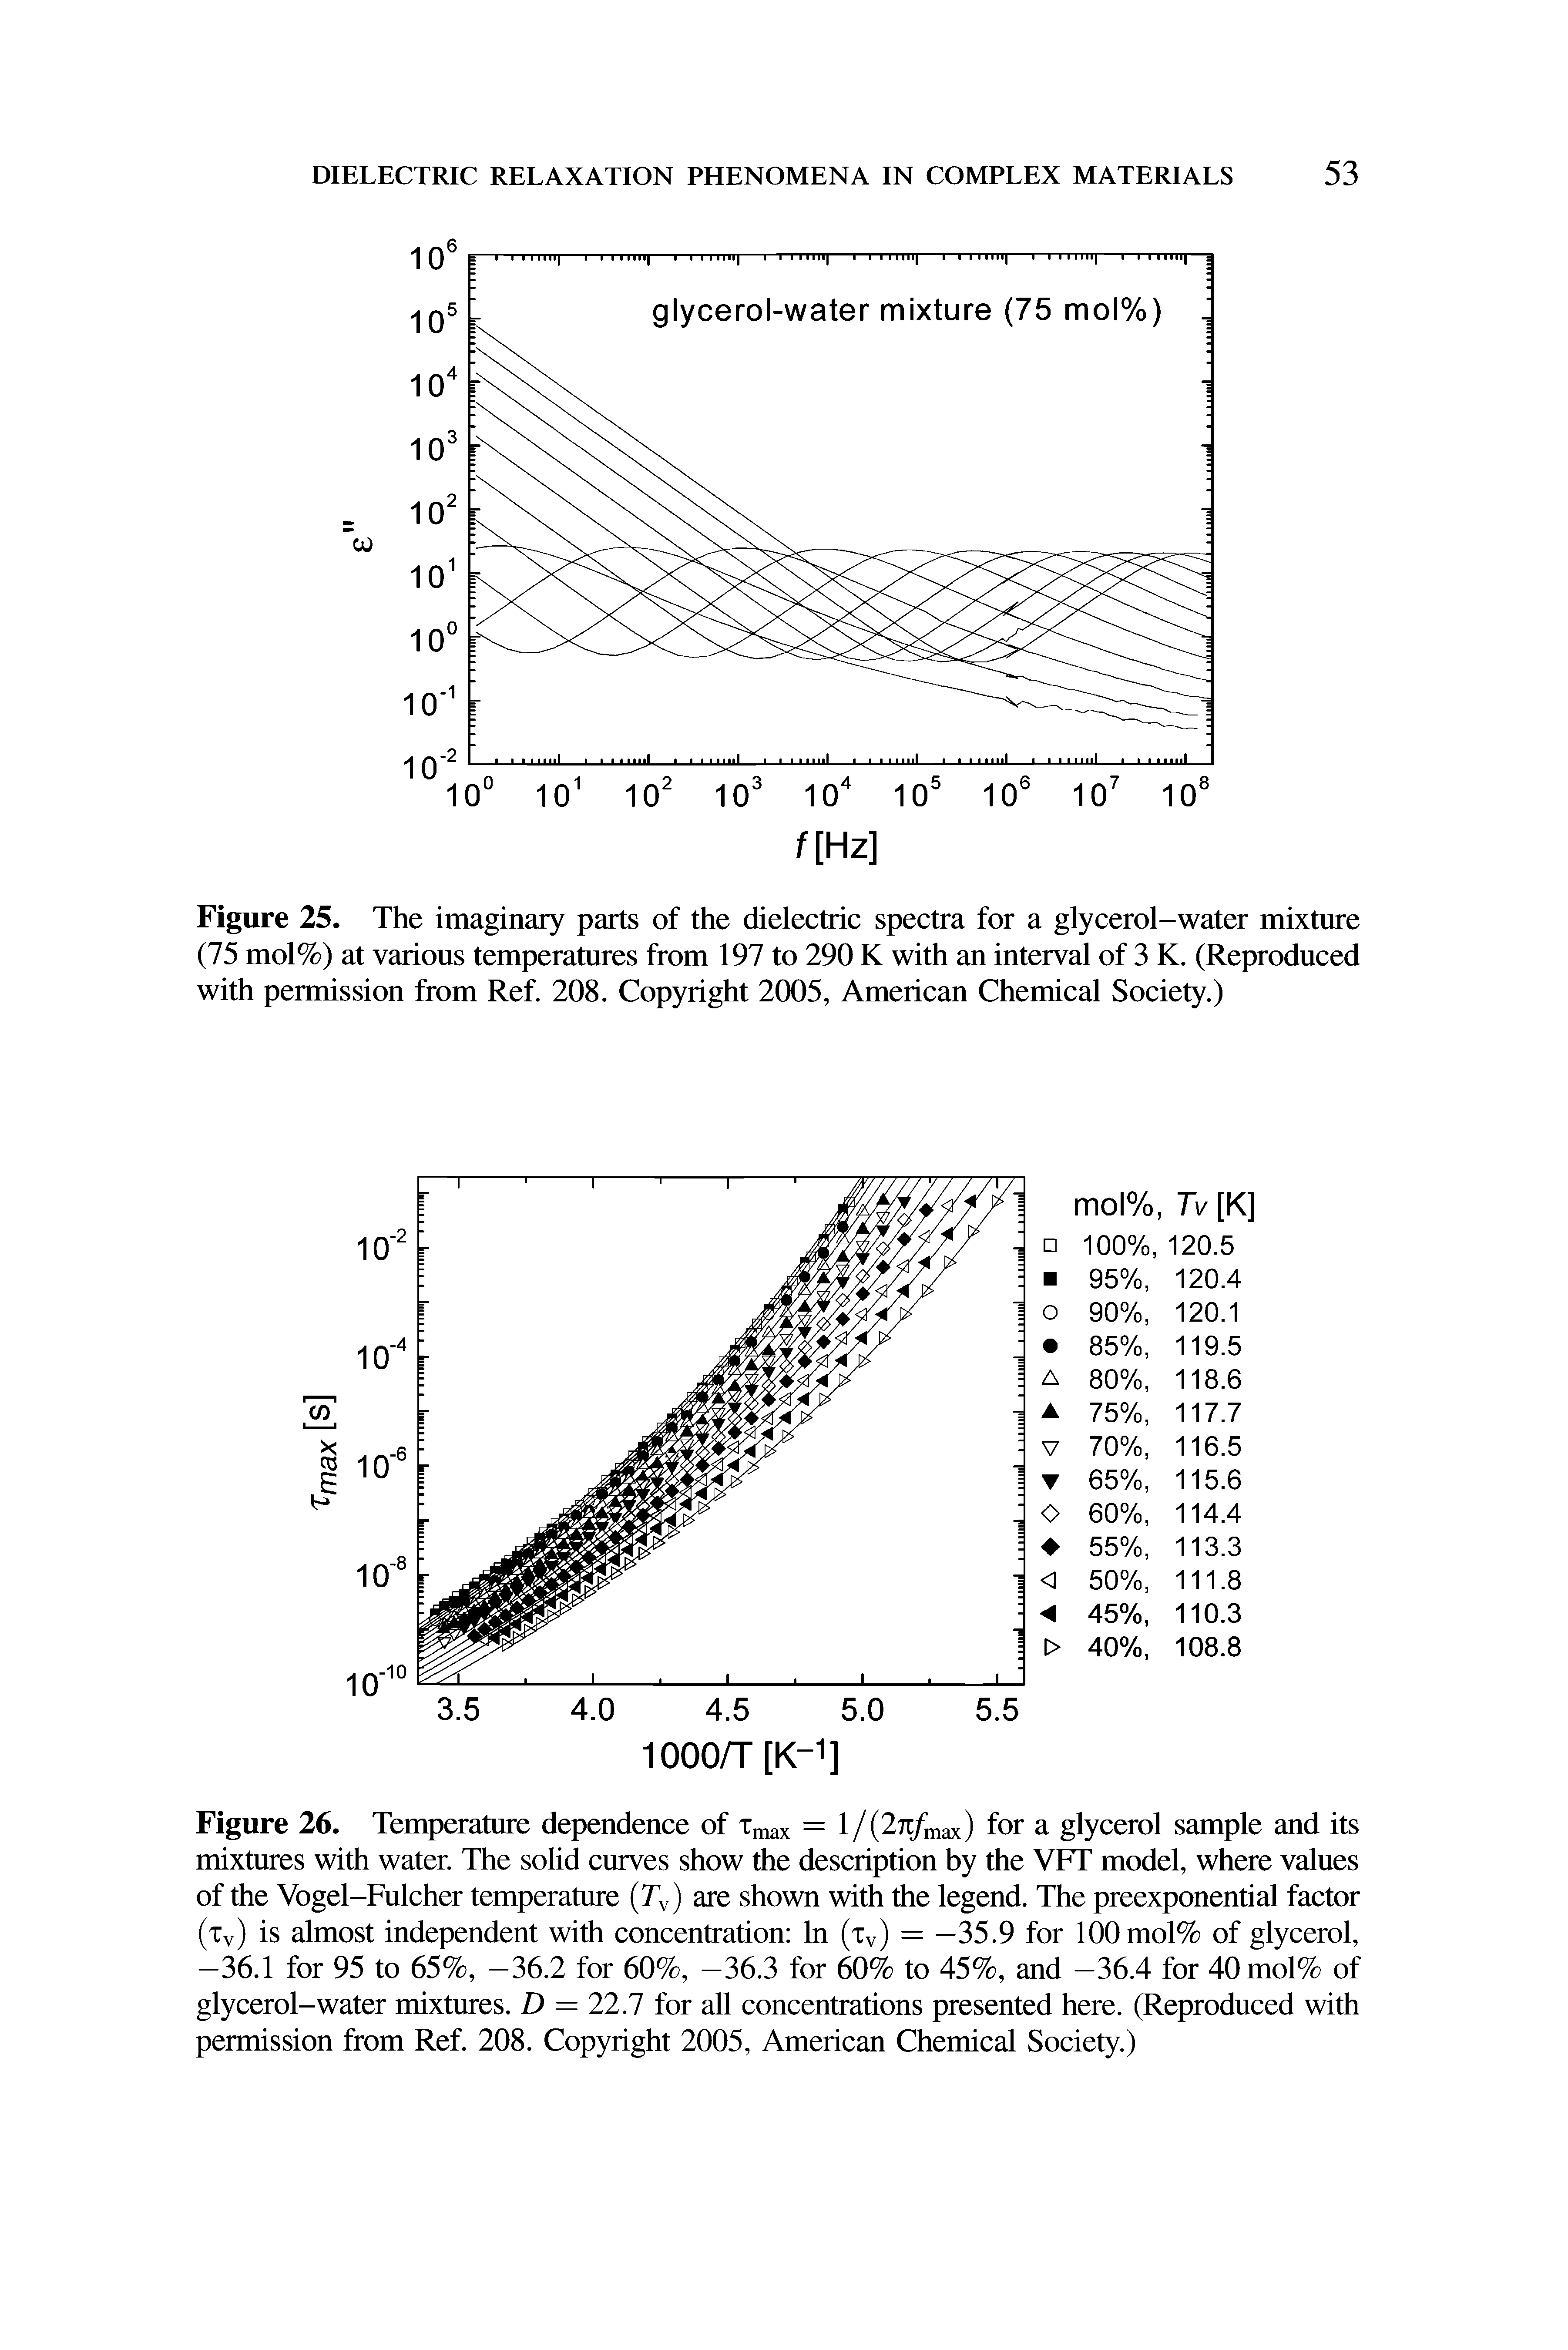 Figure 25. The imaginary parts of the dielectric spectra for a glycerol-water mixture (75 mol%) at various temperatures from 197 to 290 K with an interval of 3 K. (Reproduced with permission from Ref. 208. Copyright 2005, American Chemical Society.)...